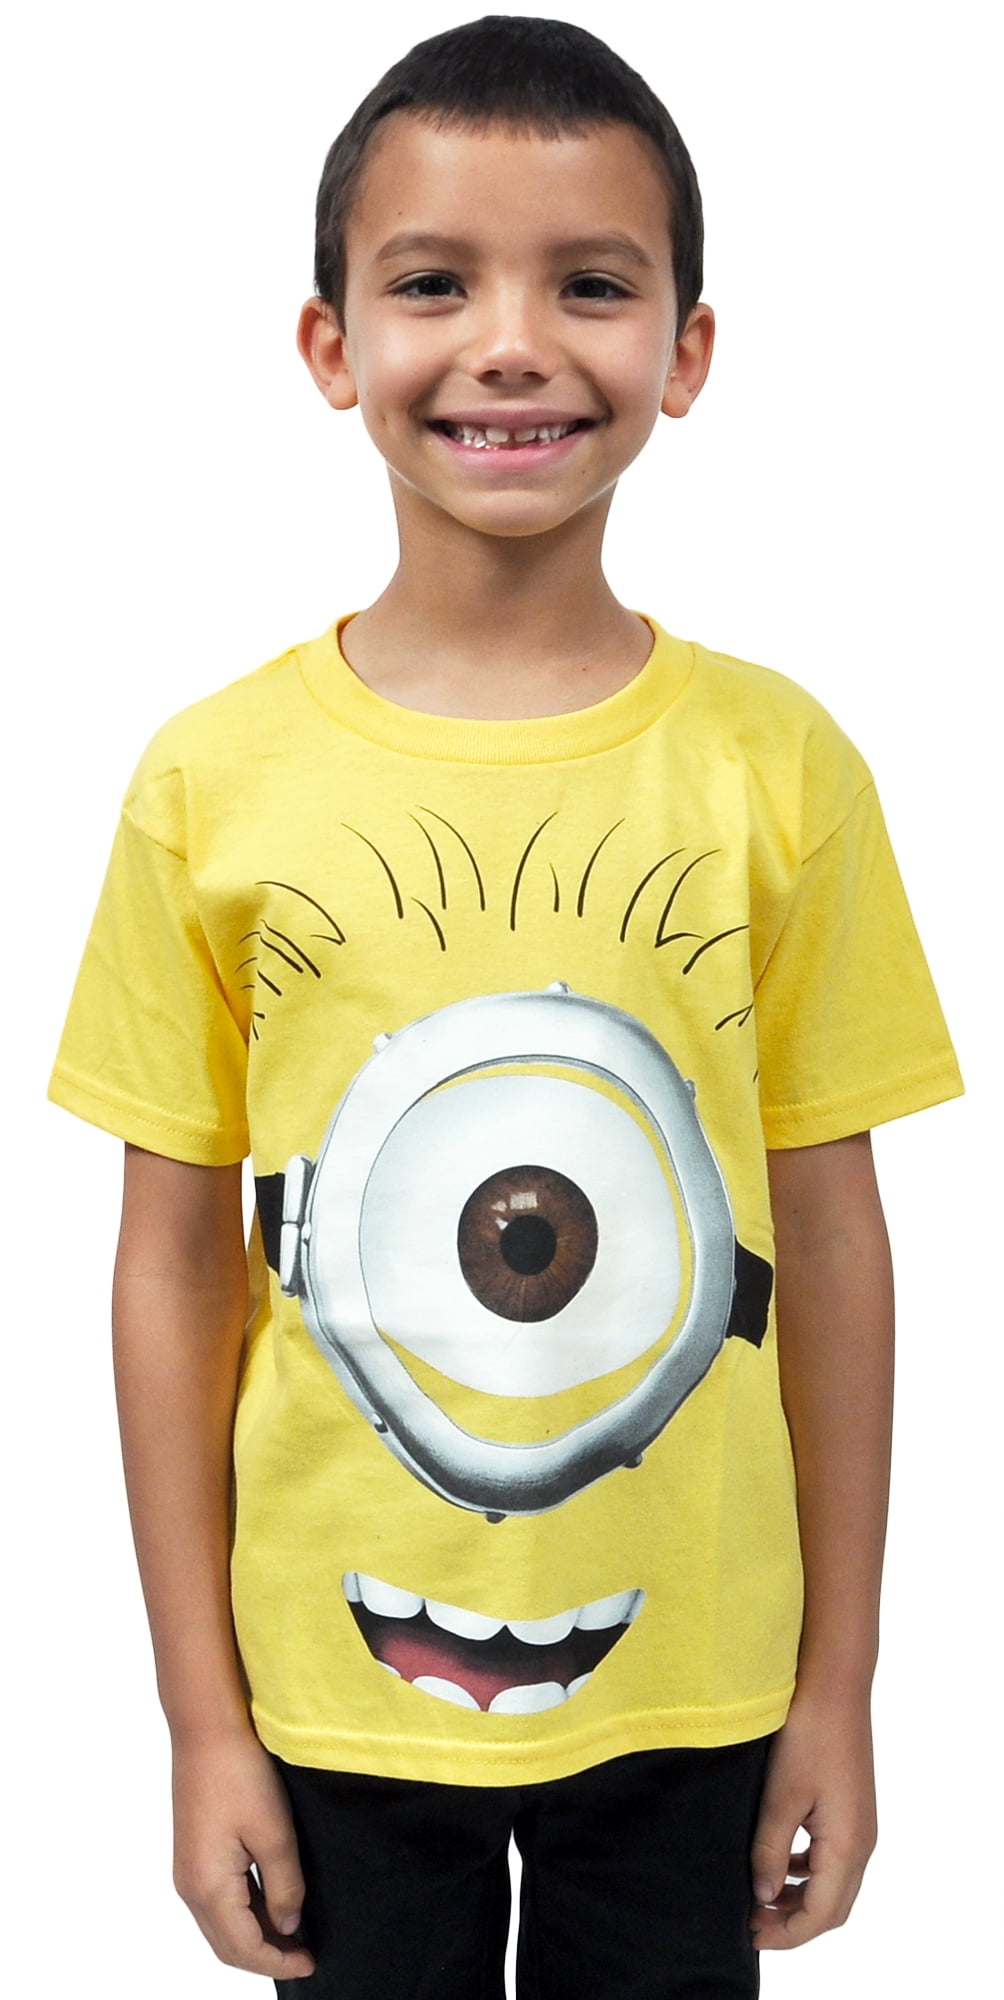 NEW Boys Girls Kids Official Minions Movie Summer T Shirt Top Age 2 3 4 5 6 7 8 